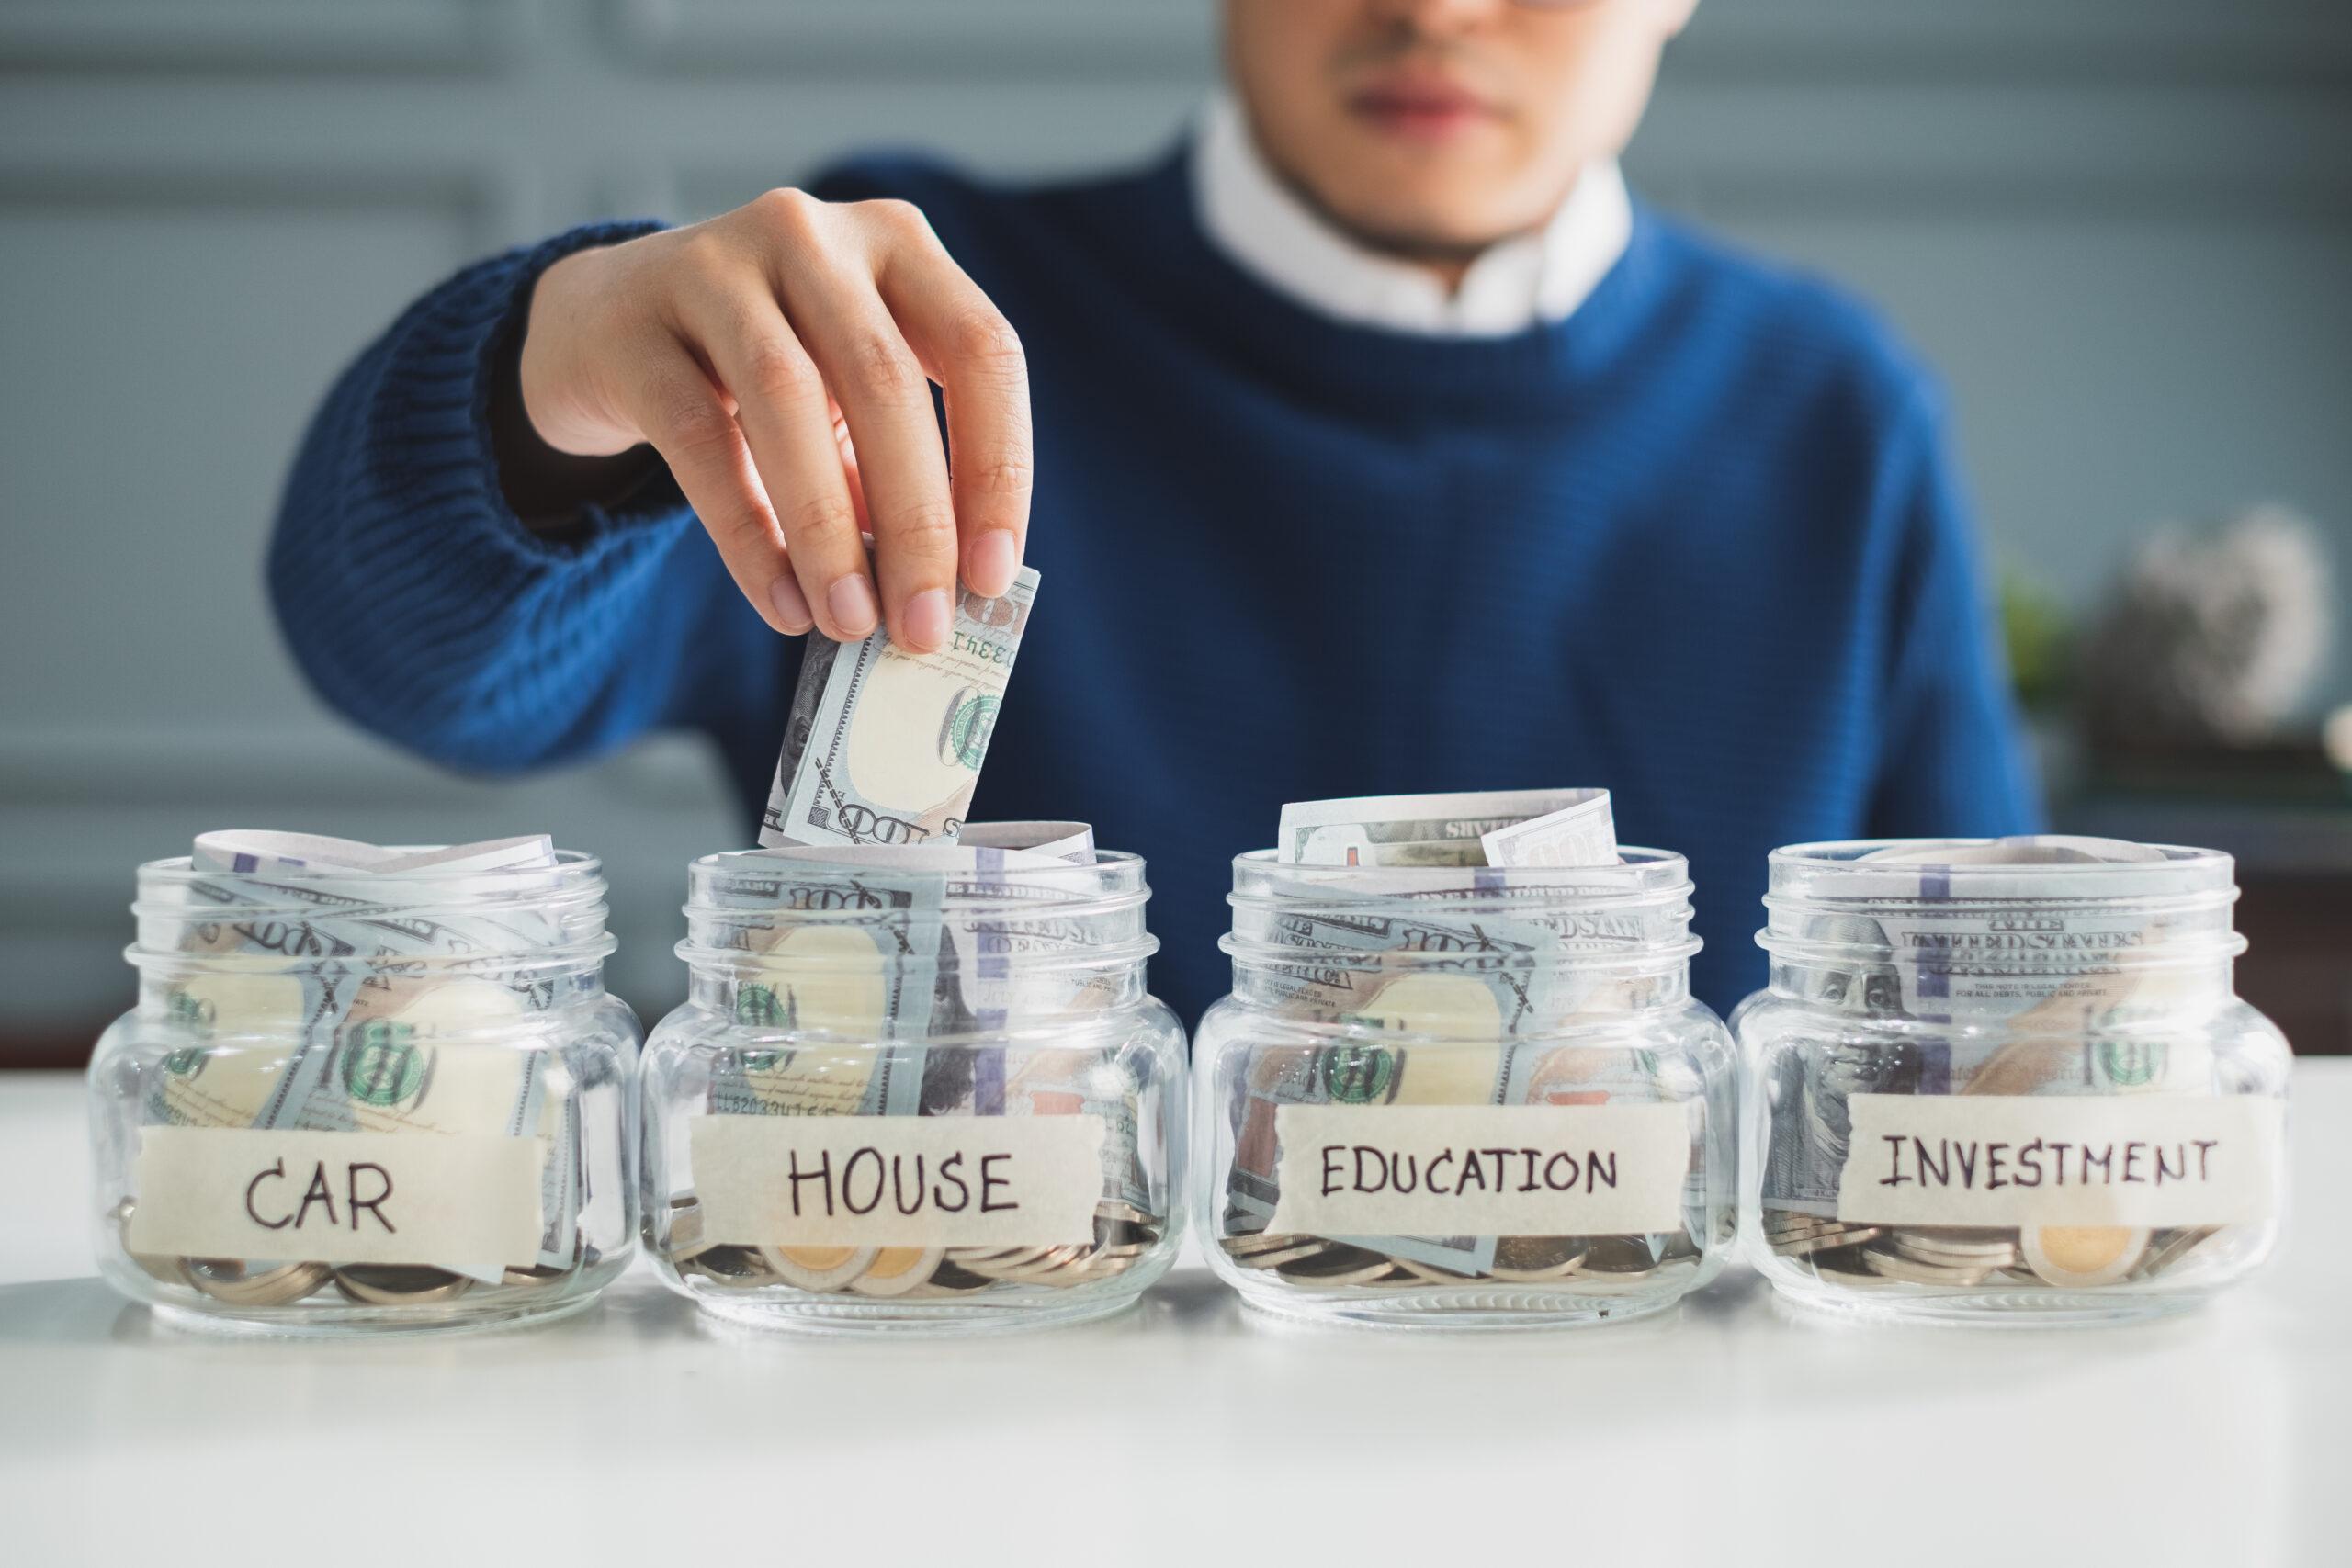 person choosing between jars labeled "car, house, education, and investment" with money in hand